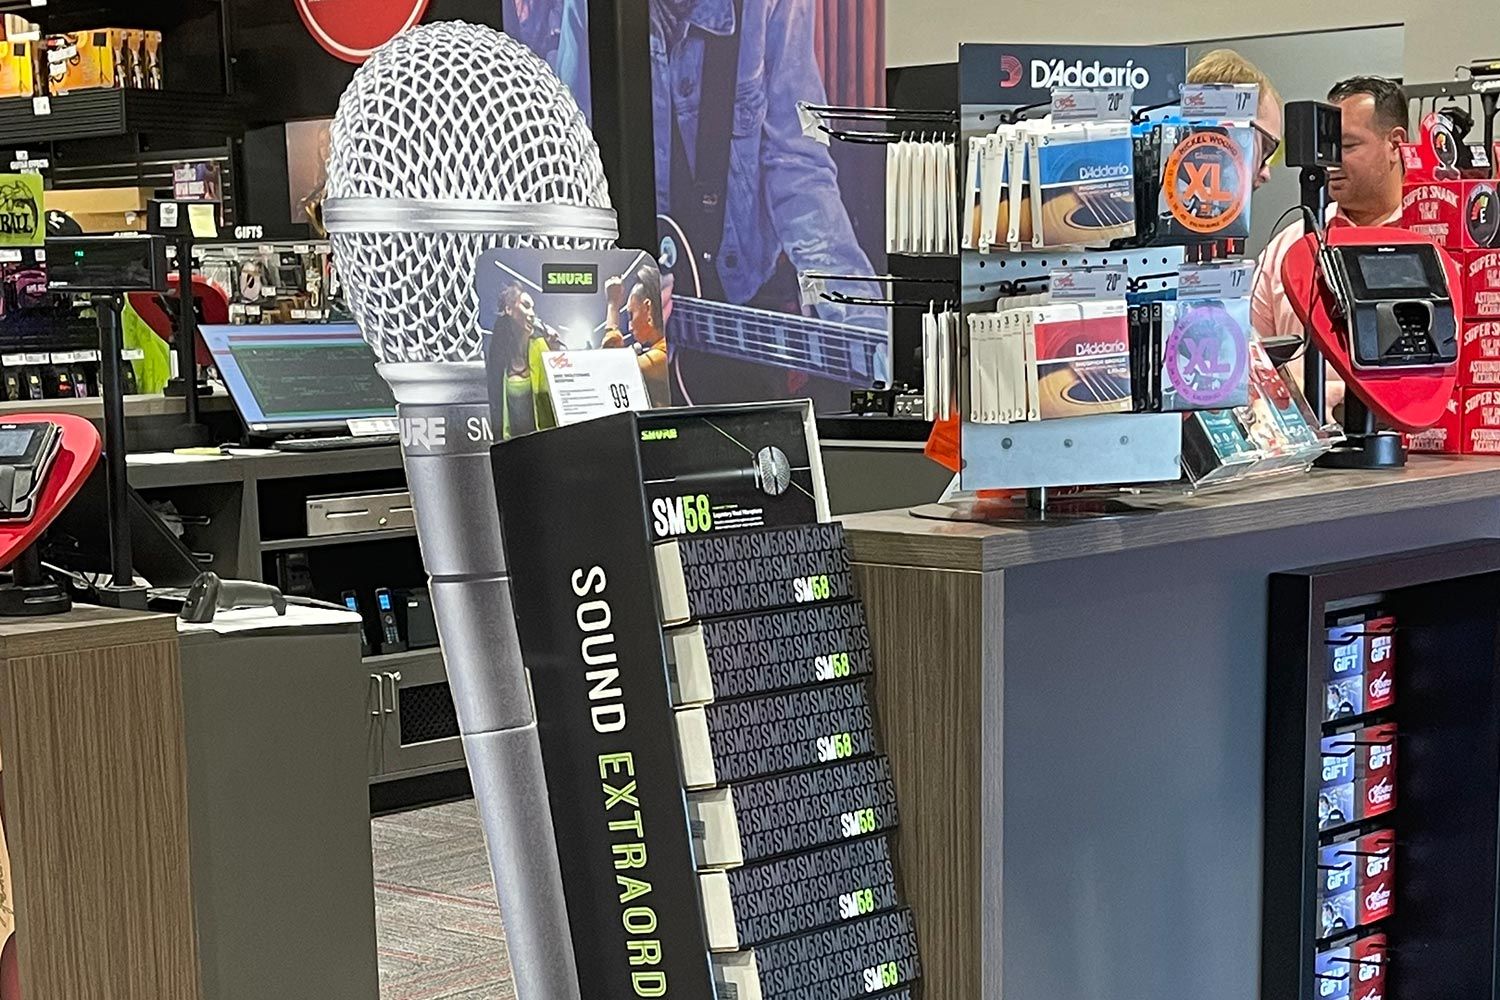 Shure stand in a retail audio store